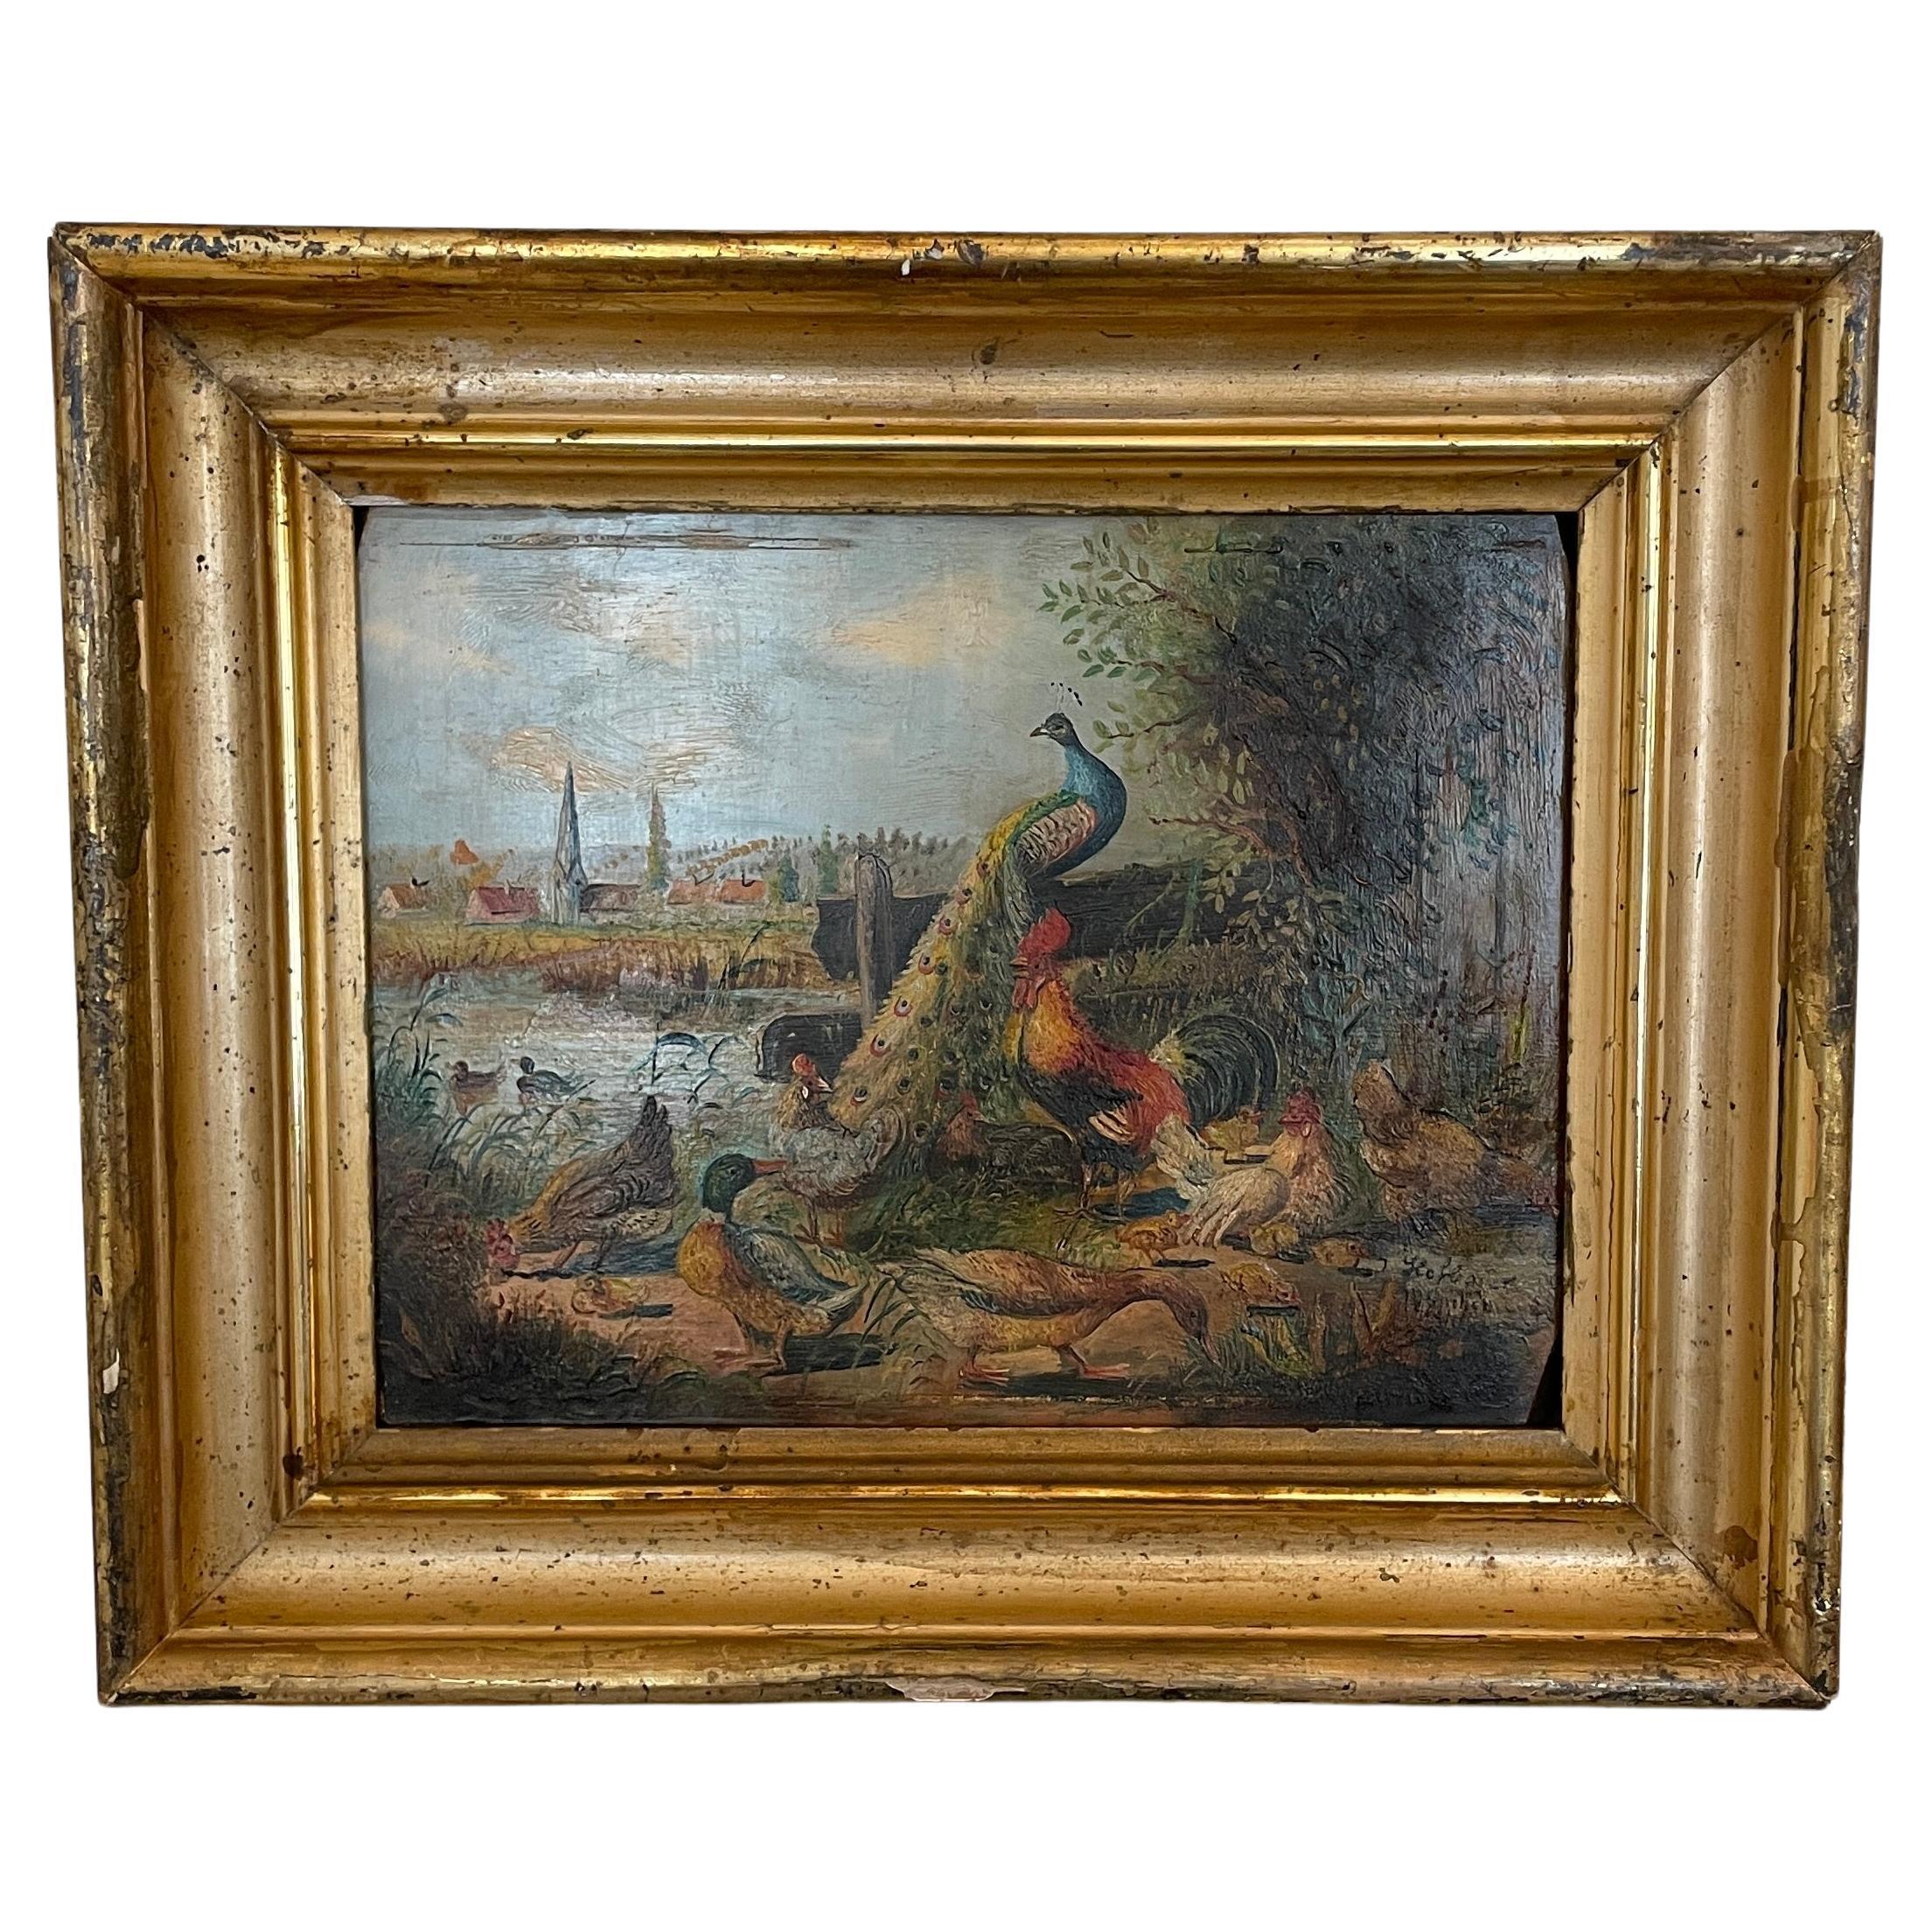 1950s German Oil Painting on Wood in an Old Gilded Frame by Josef Hofbauer